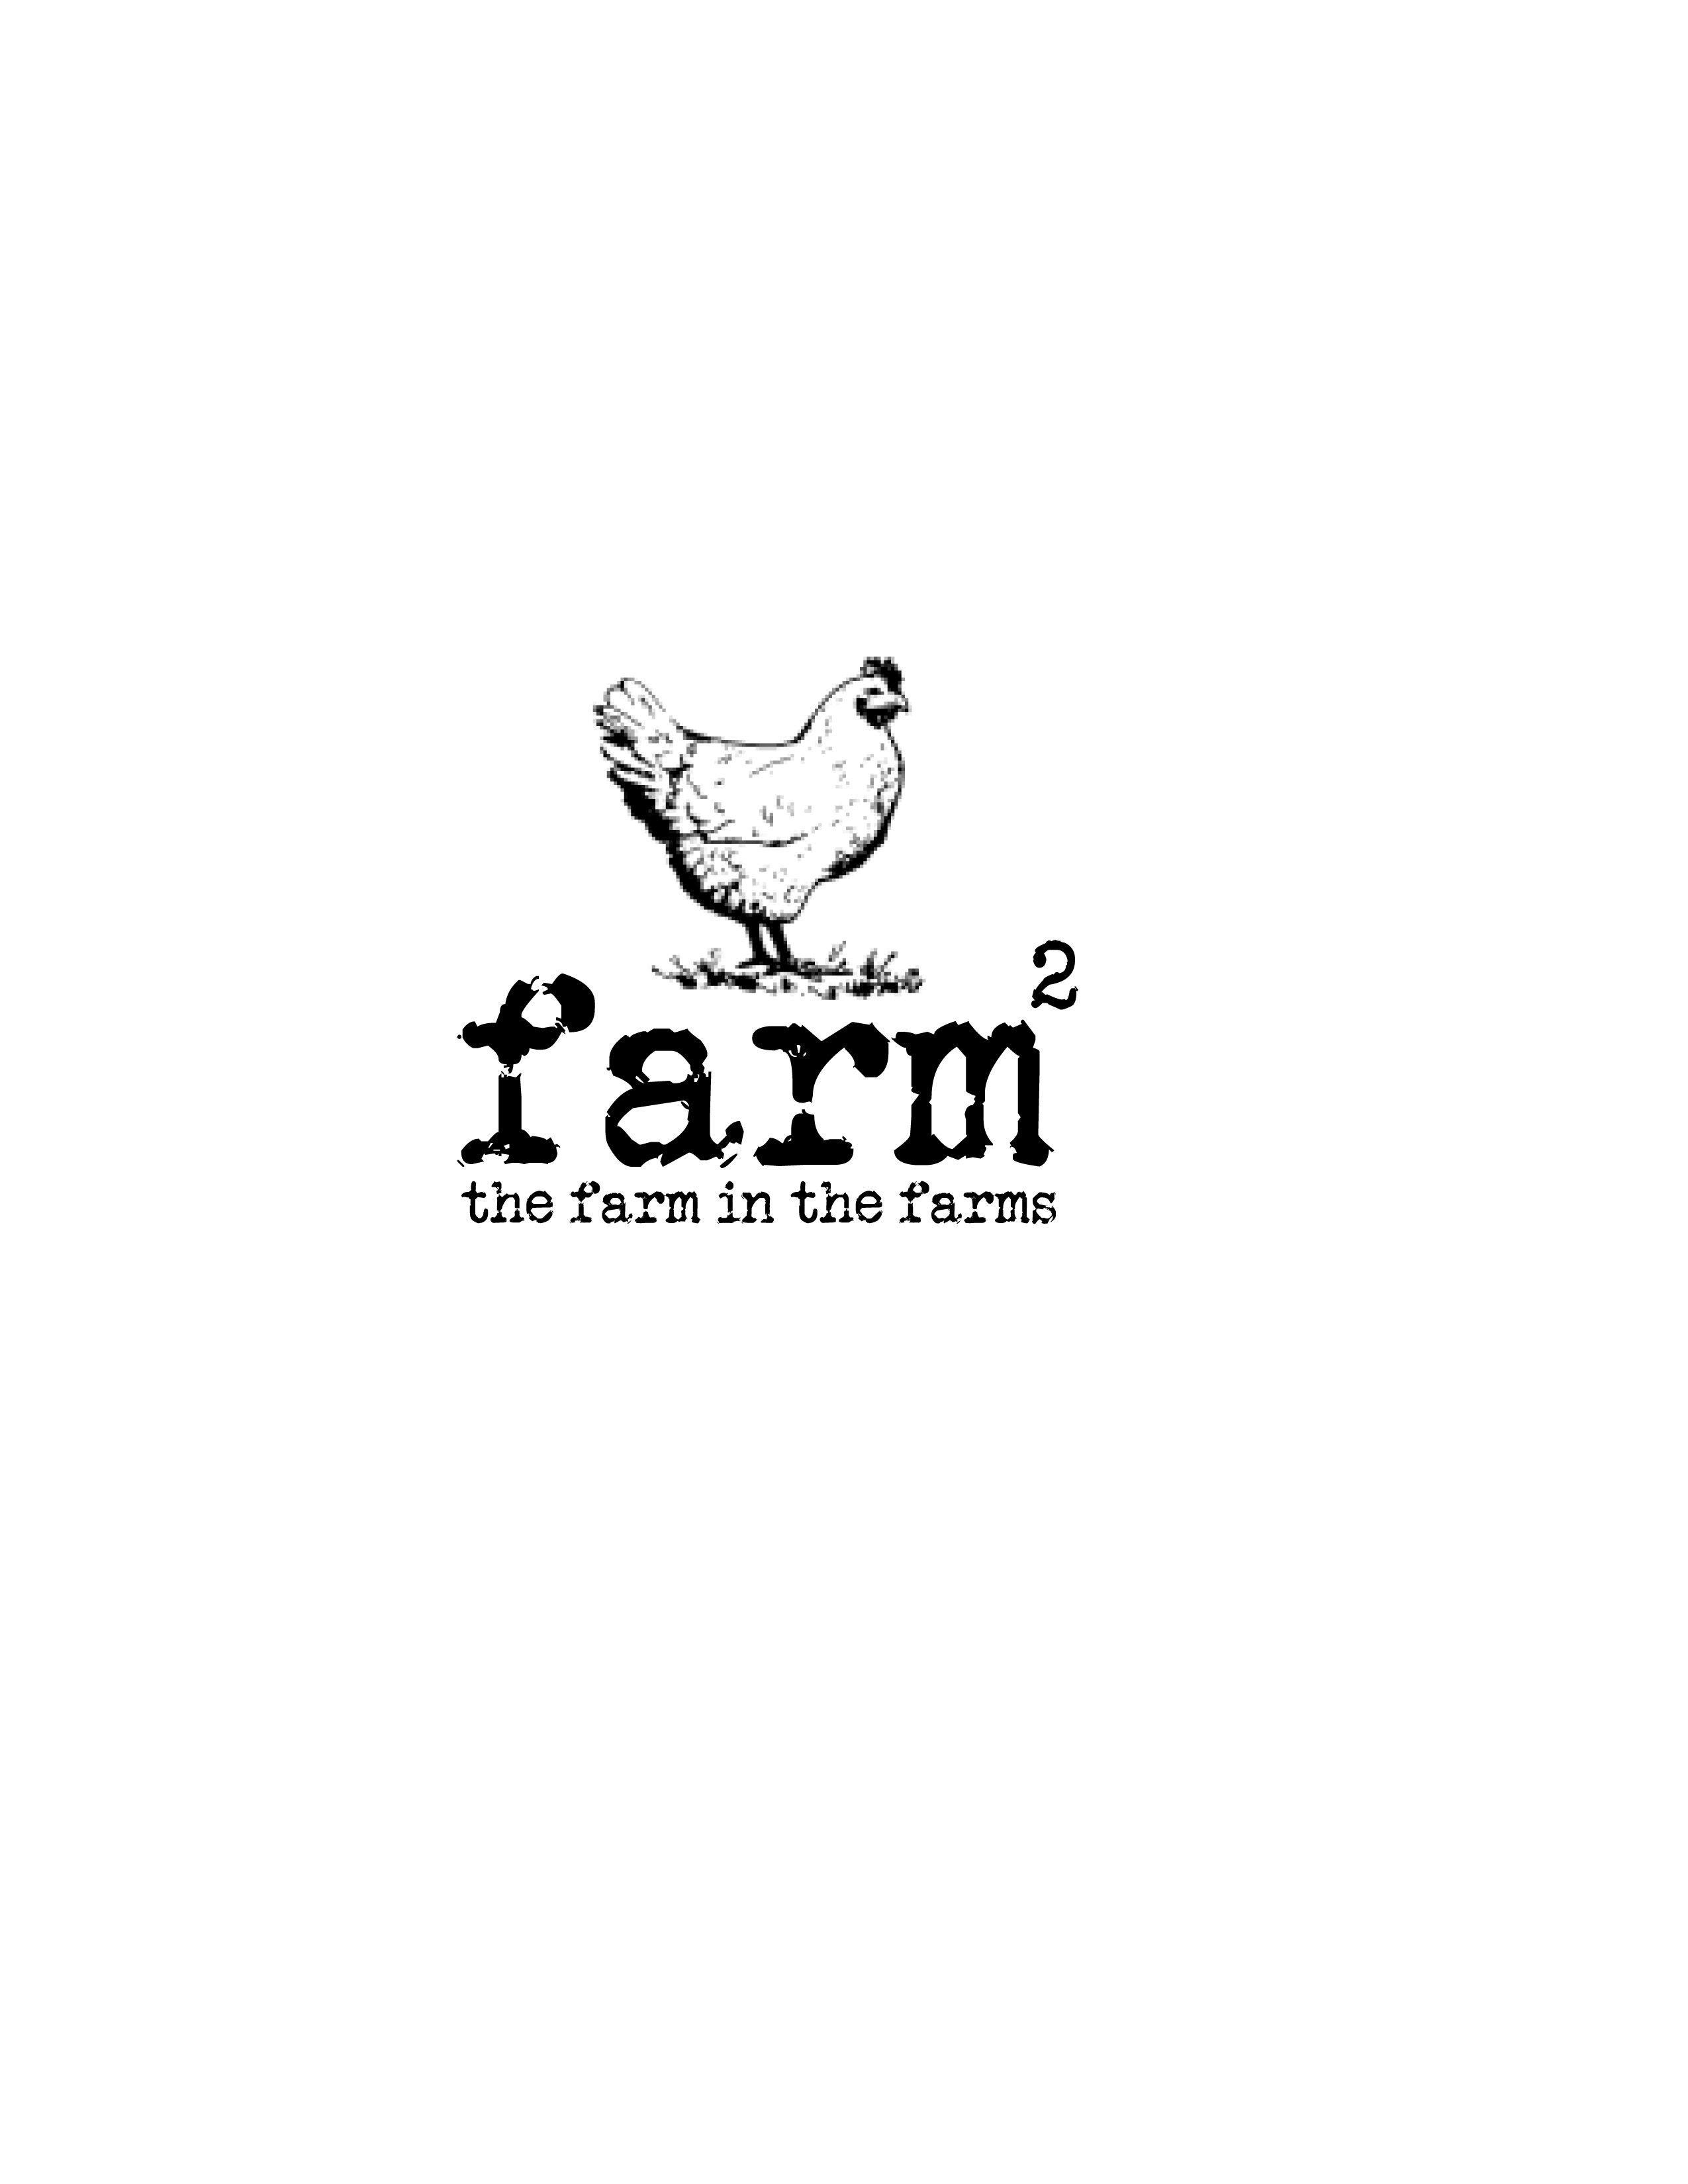 I and the Egg Logo - Logo for local egg farm in Grosse Pointe Farms. Happy Hill Farm